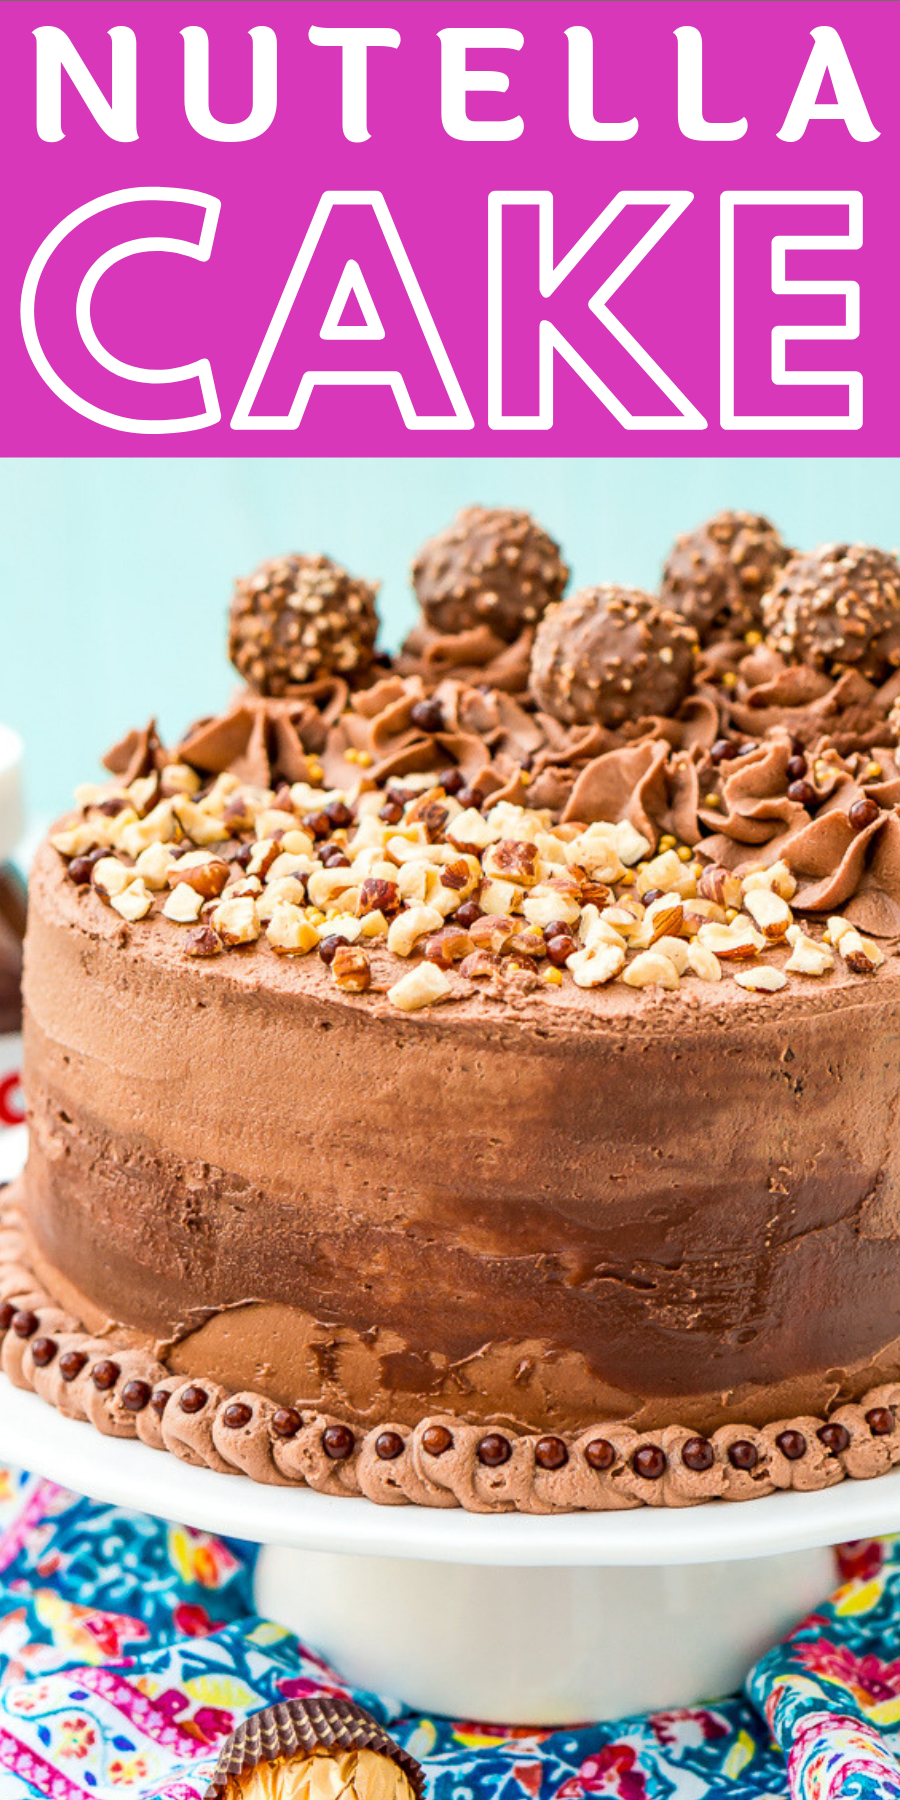 This Nutella Cake is a rich and indulgent dessert highlighting the delicious blend of chocolate and hazelnut! A moist chocolate cake coated in a decadent Nutella Frosting and topped with Ferrero Rocher candy and chopped hazelnuts. via @sugarandsoulco